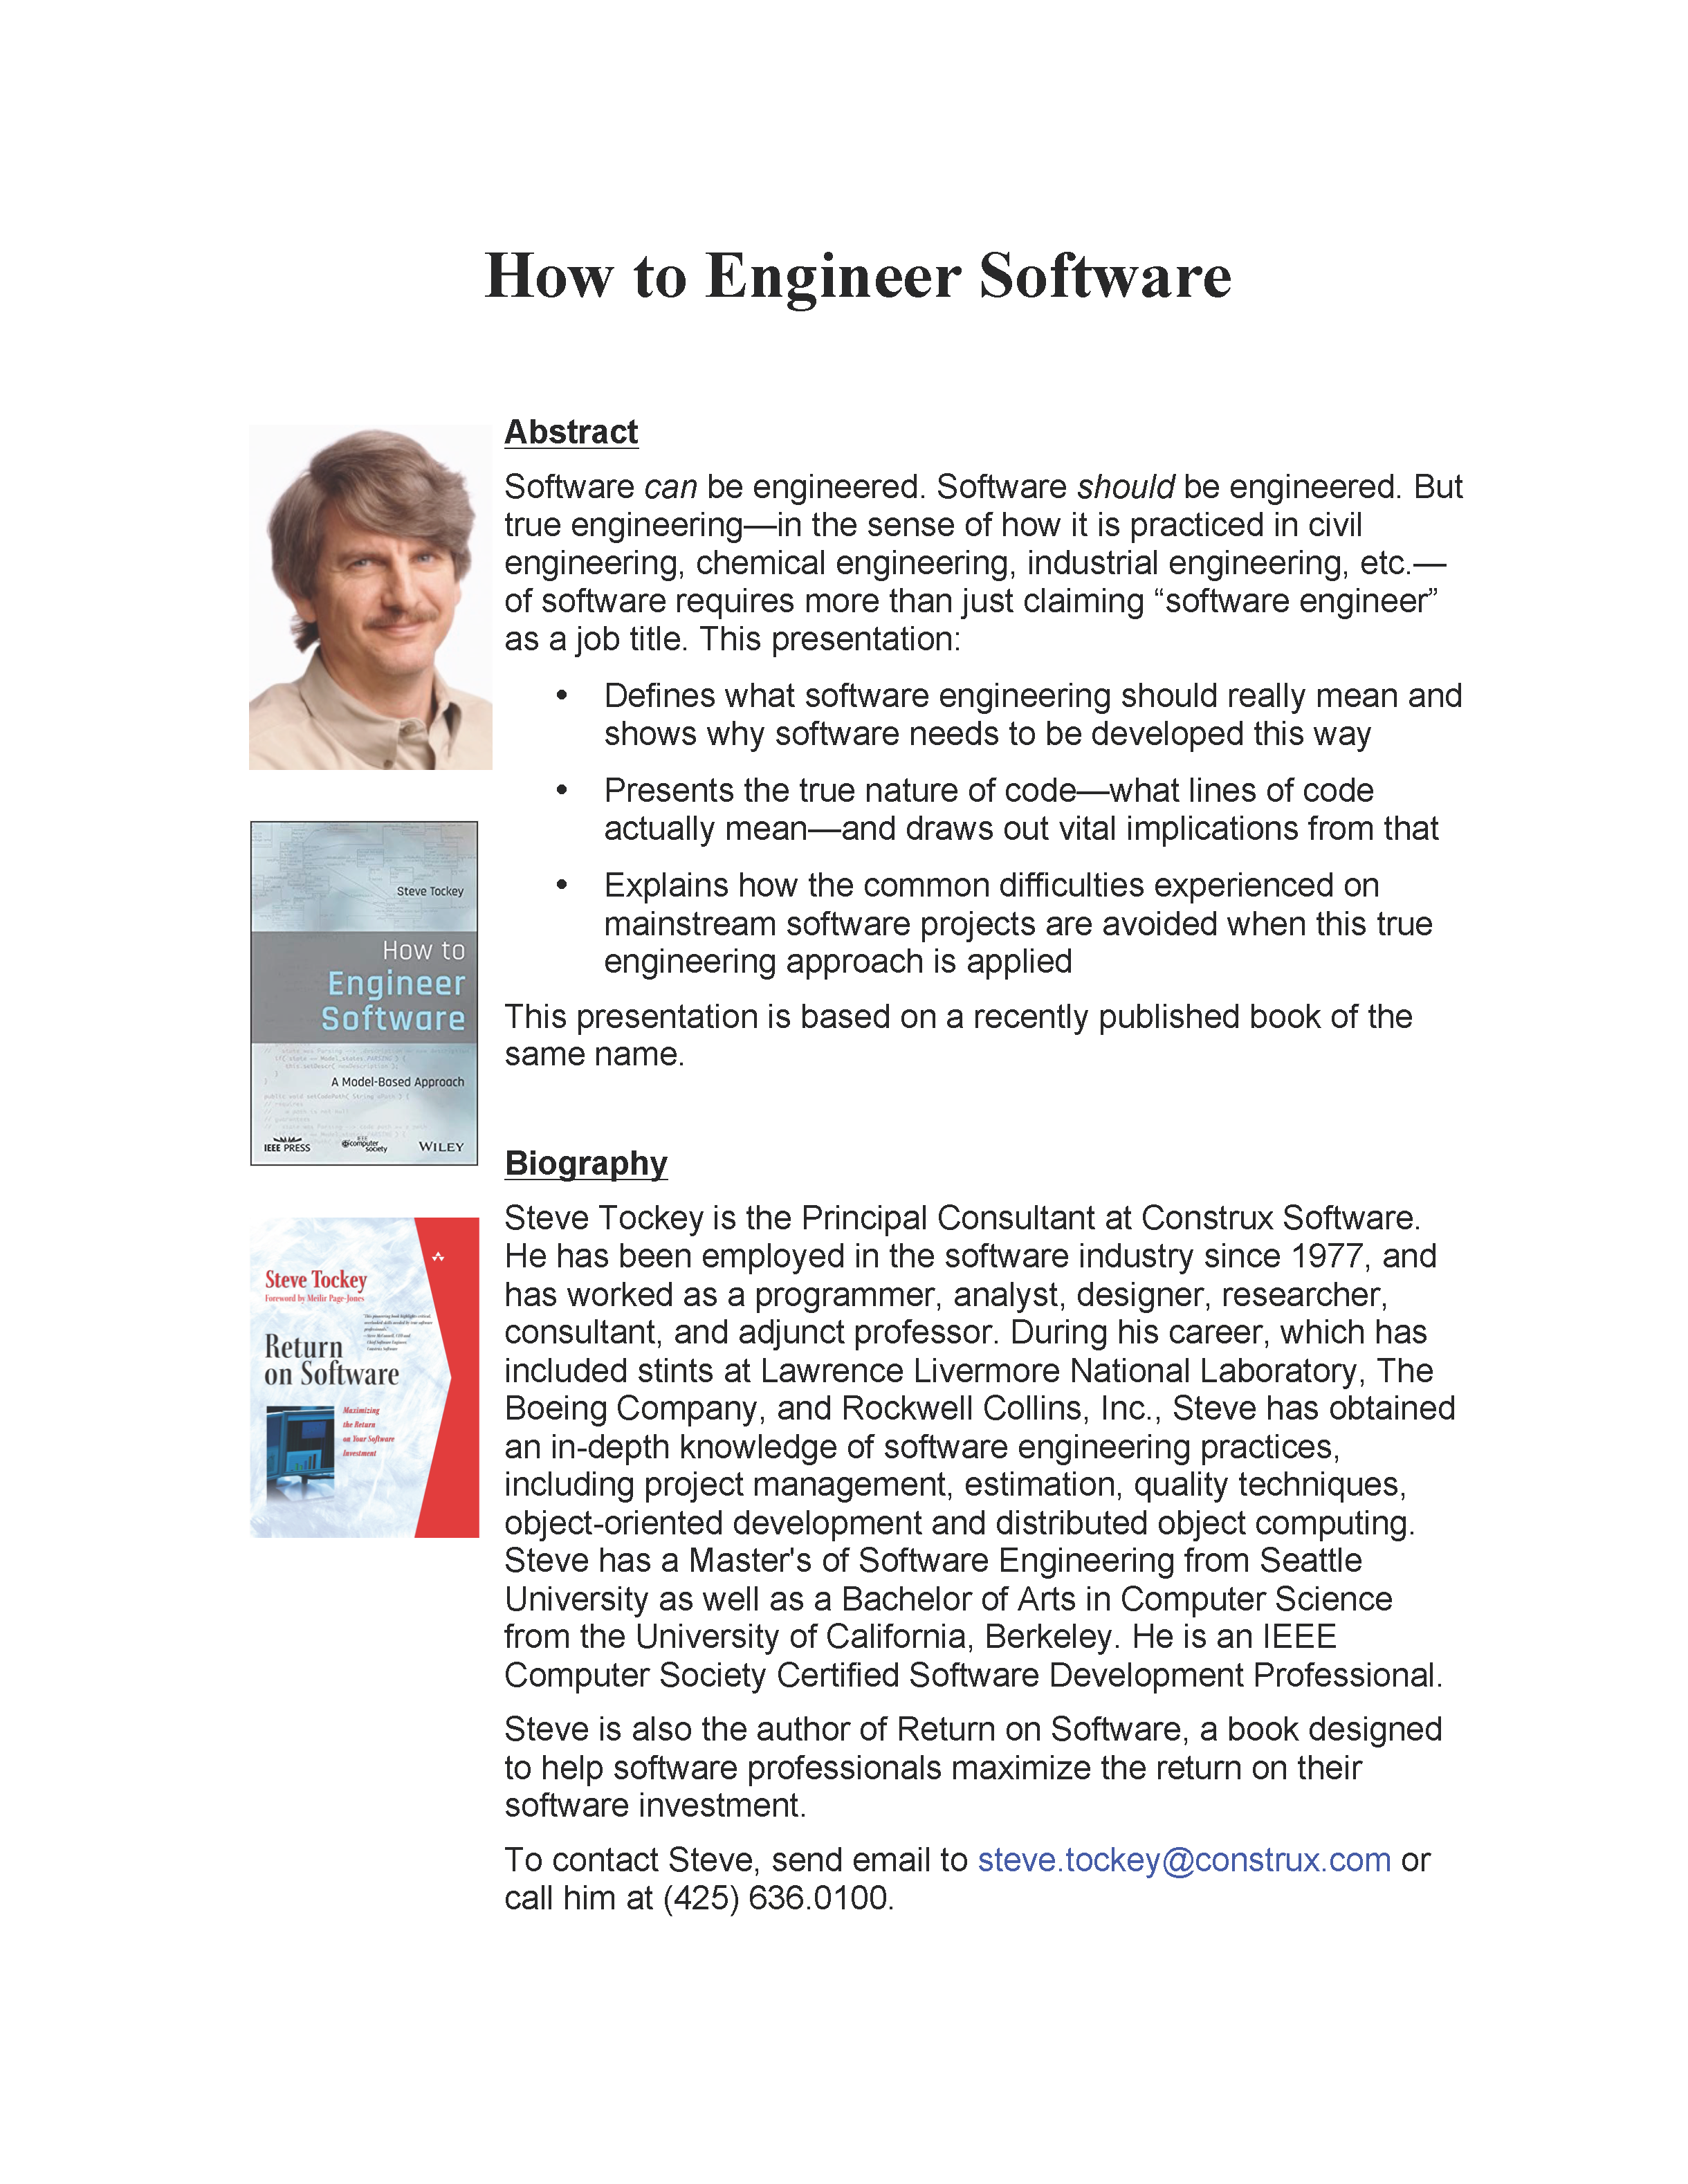 Computer Science Seminar 1. How to Engineer Software